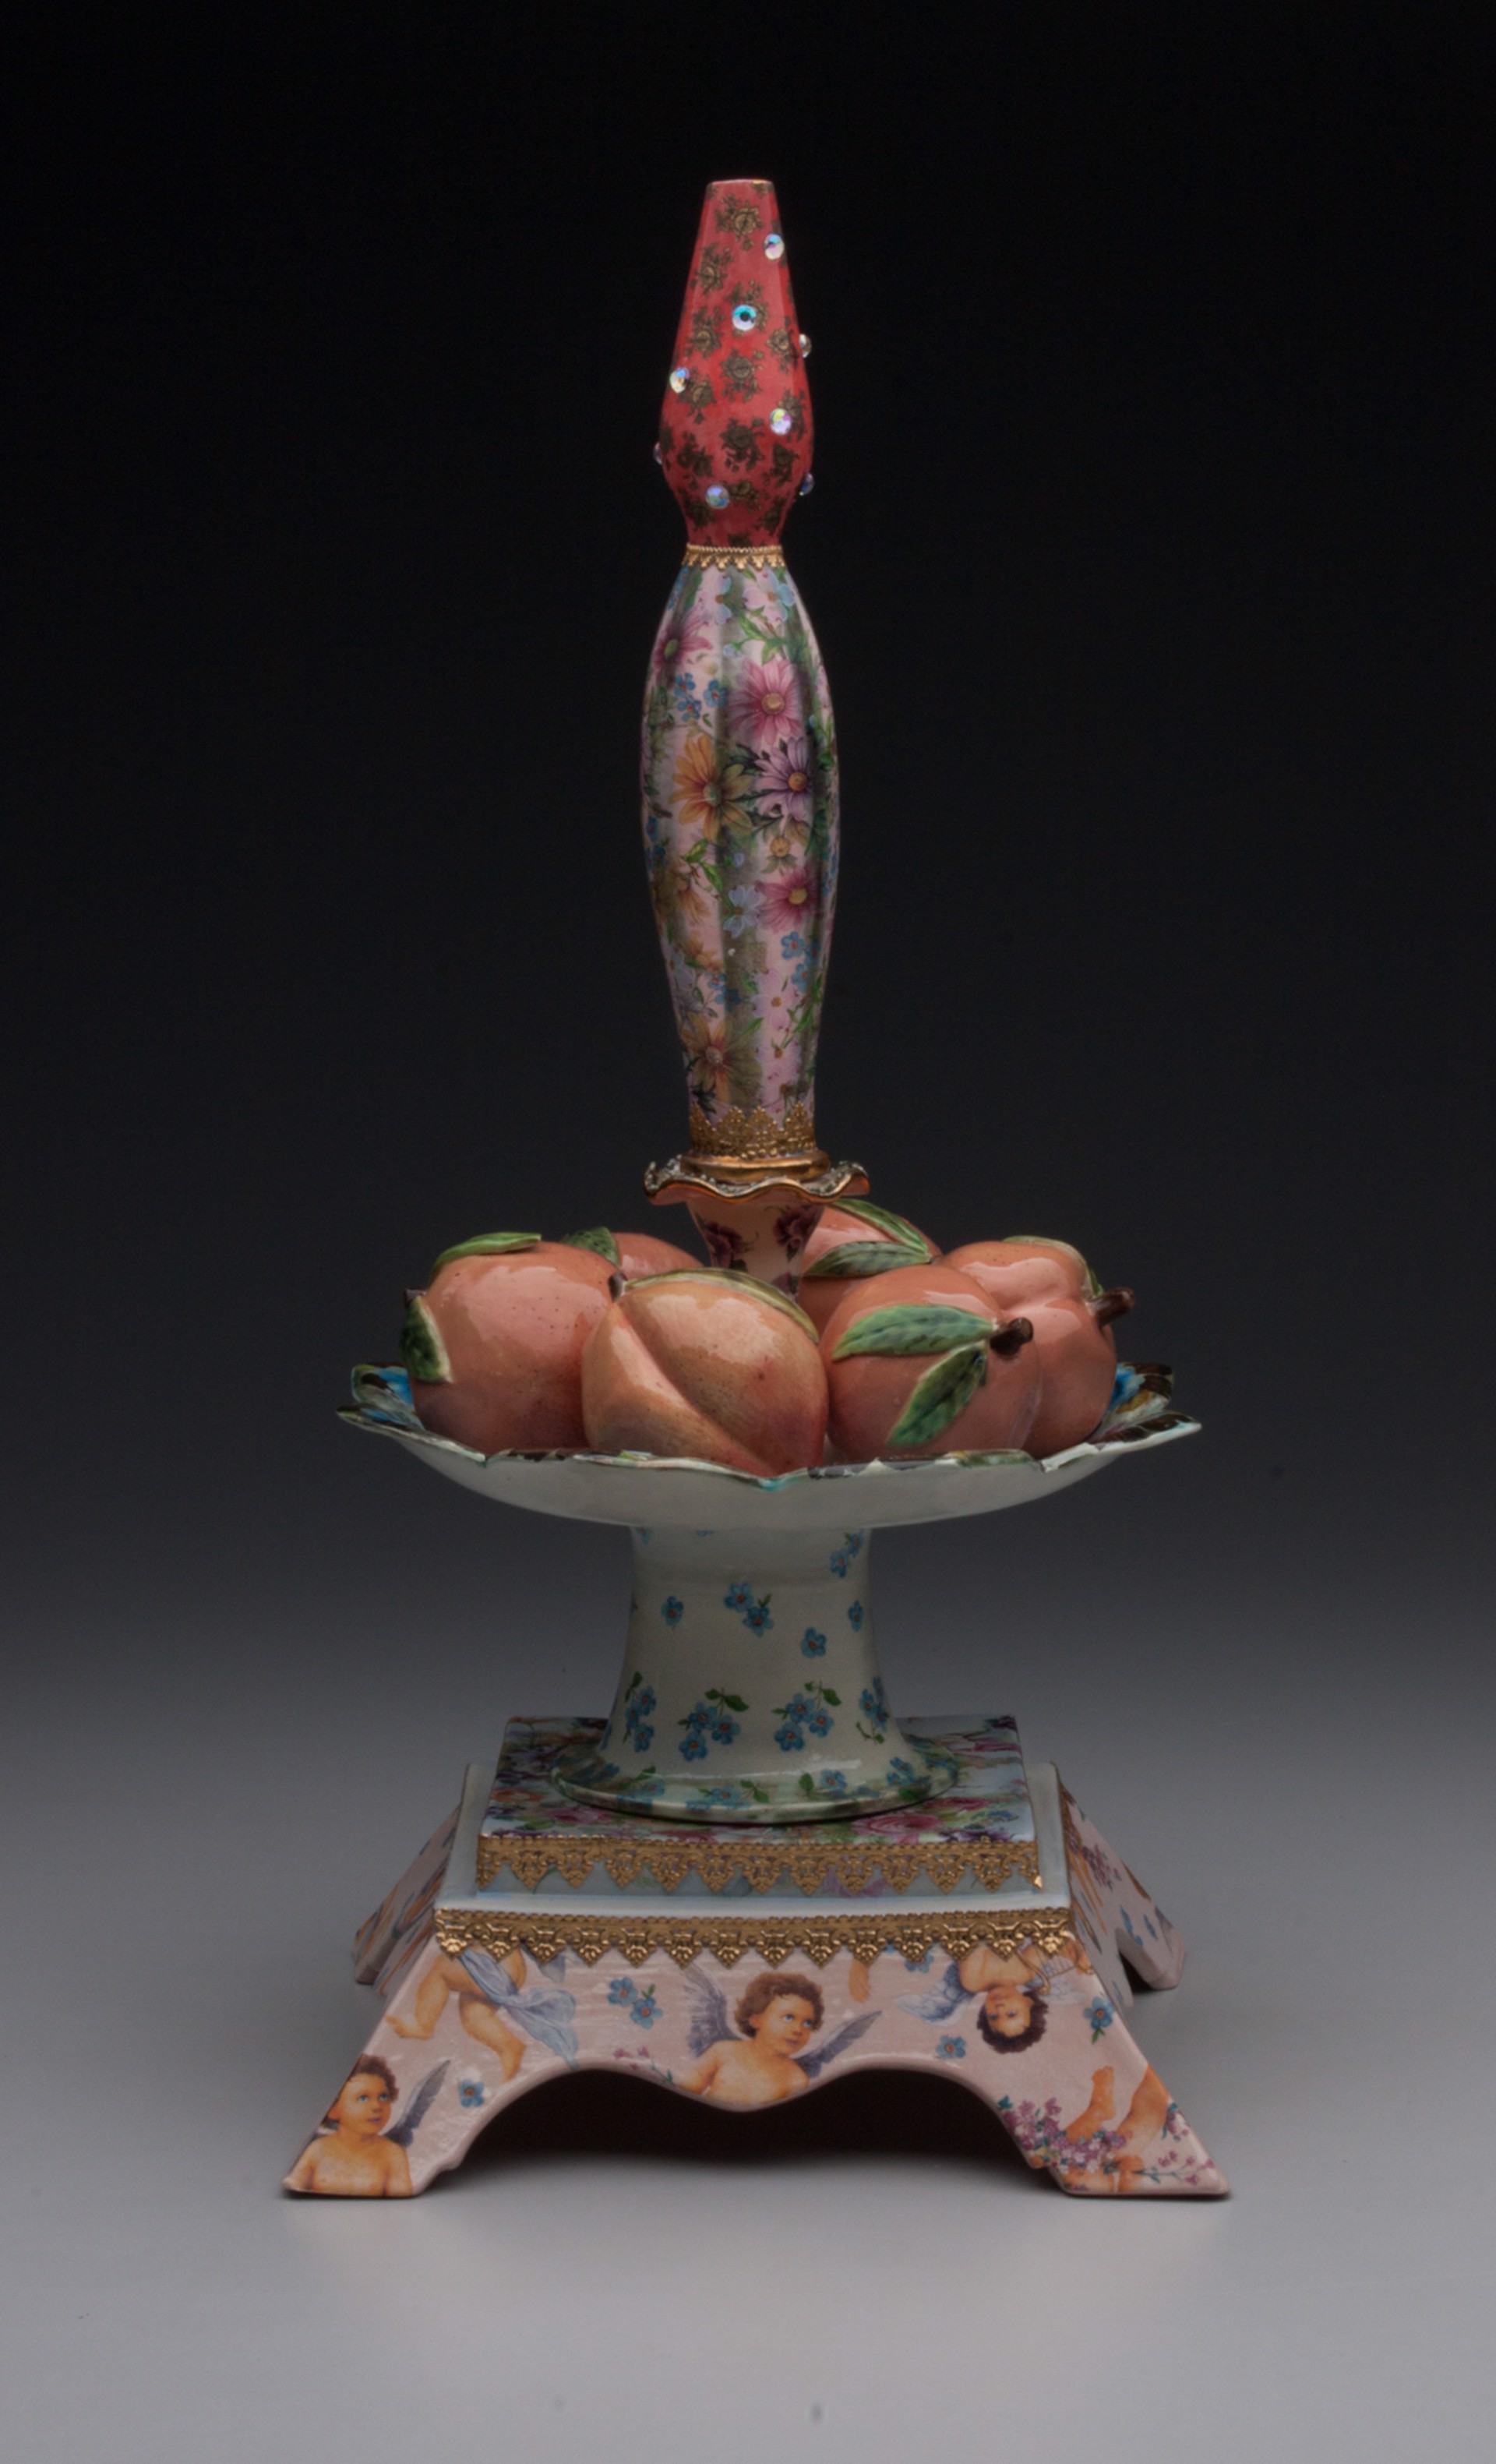 Peach Compote with Phallic by Larry Buller